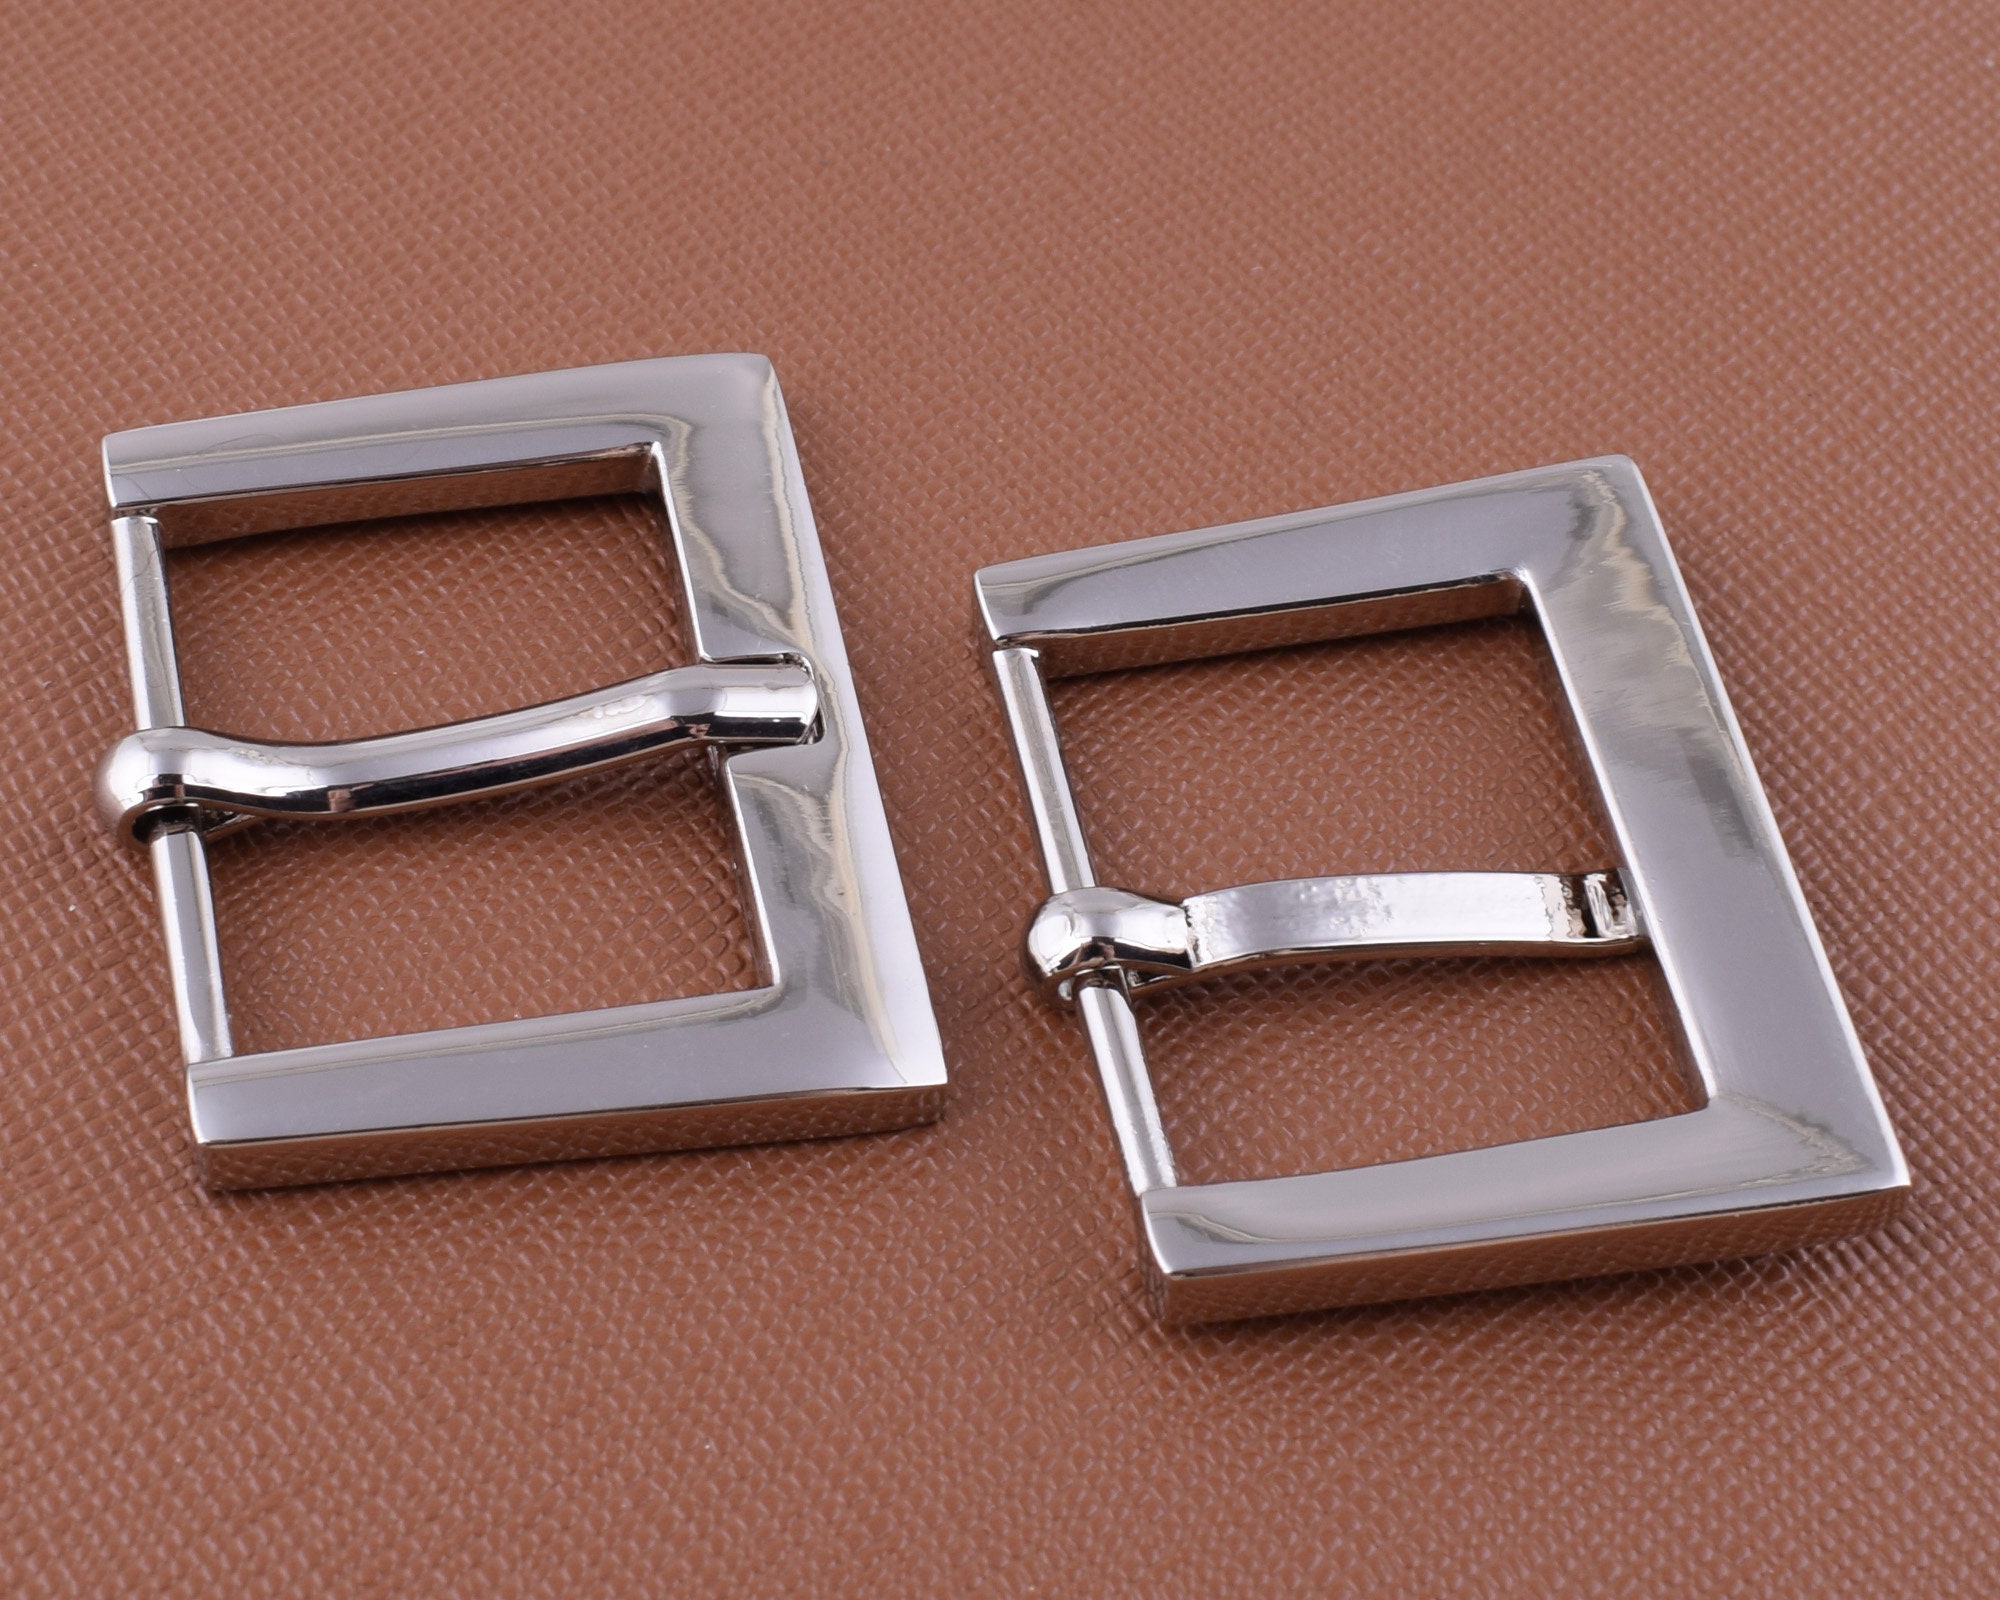 Wholesale 40mm reversible belt buckle replacement durable in use